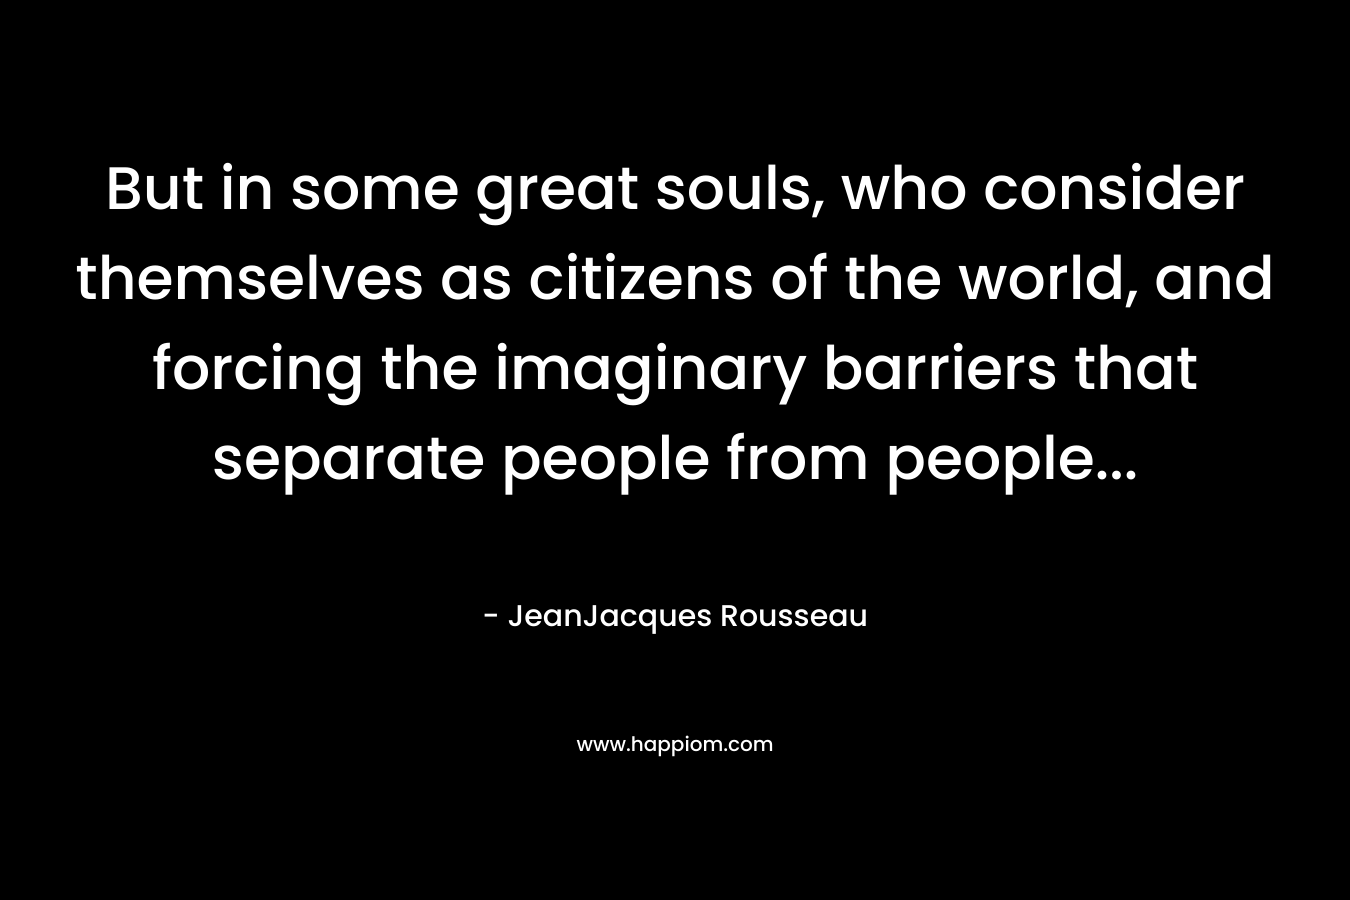 But in some great souls, who consider themselves as citizens of the world, and forcing the imaginary barriers that separate people from people… – JeanJacques Rousseau